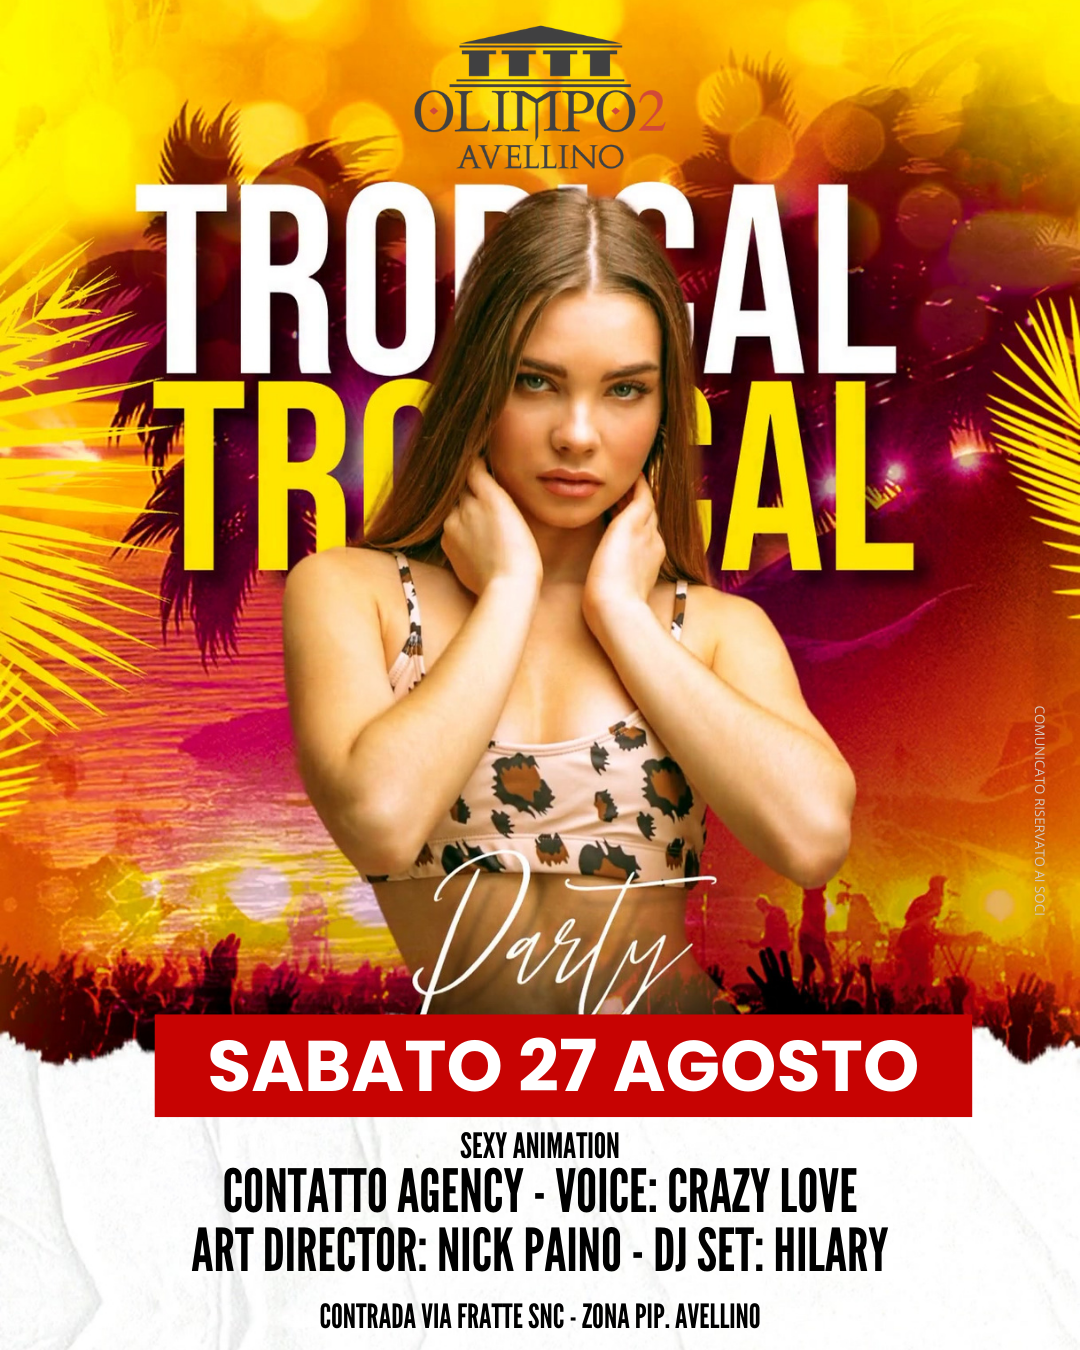 tropical party olimpo 2 avellino